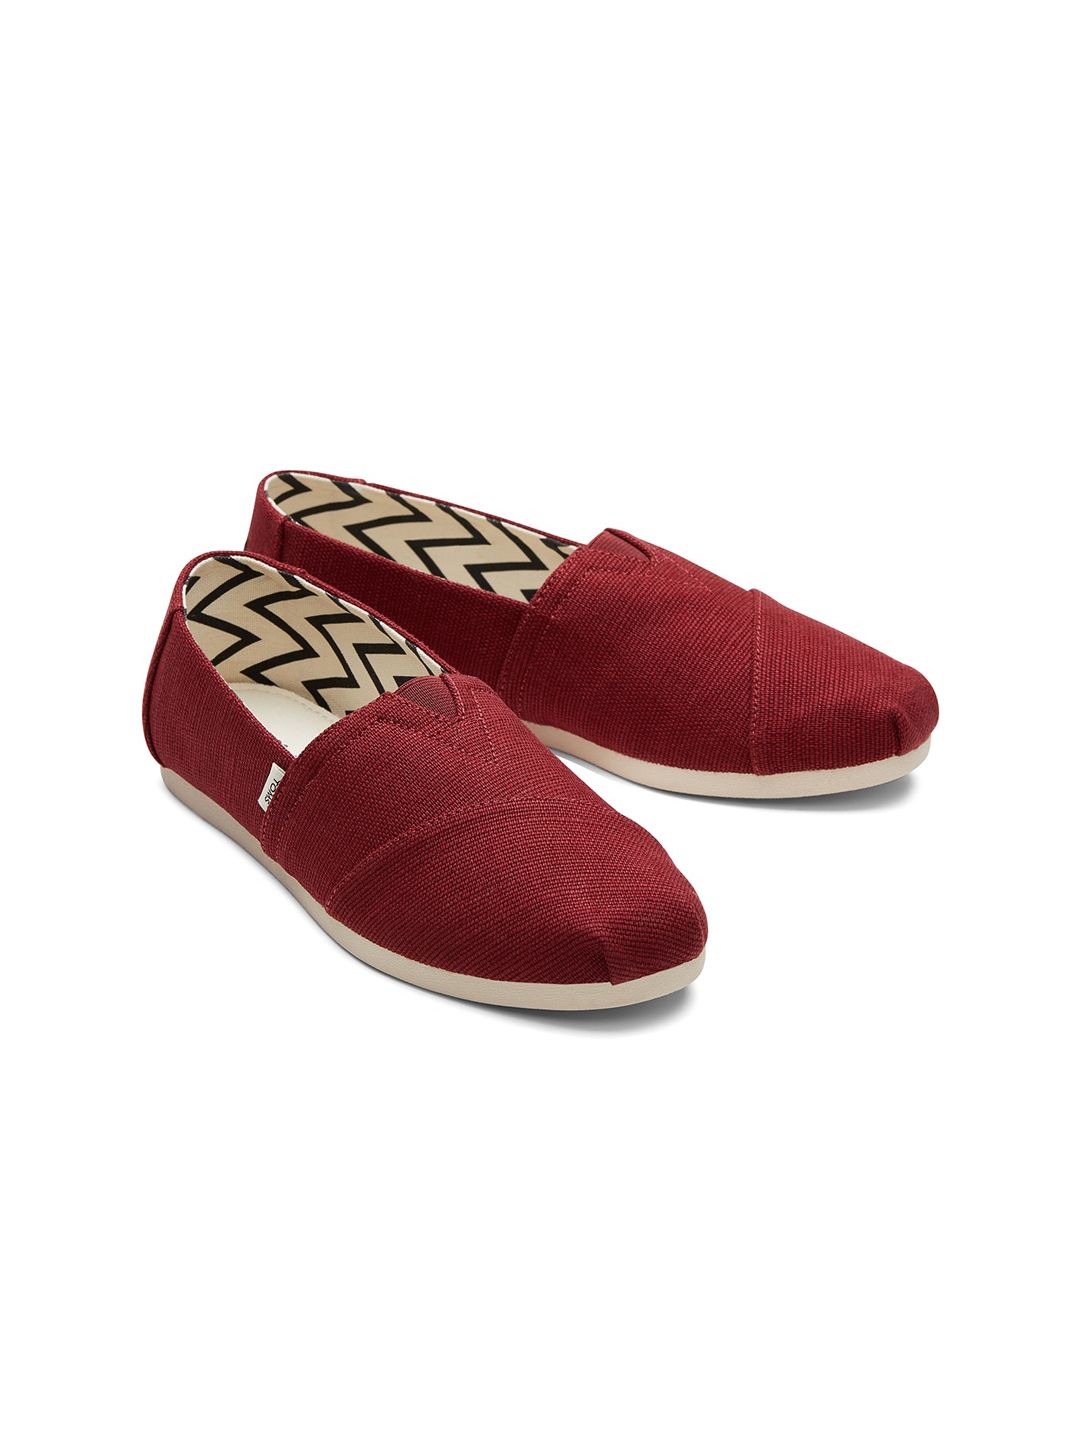 TOMS Women Red Solid Alpargata Canvas Slip-On Sneakers Price in India